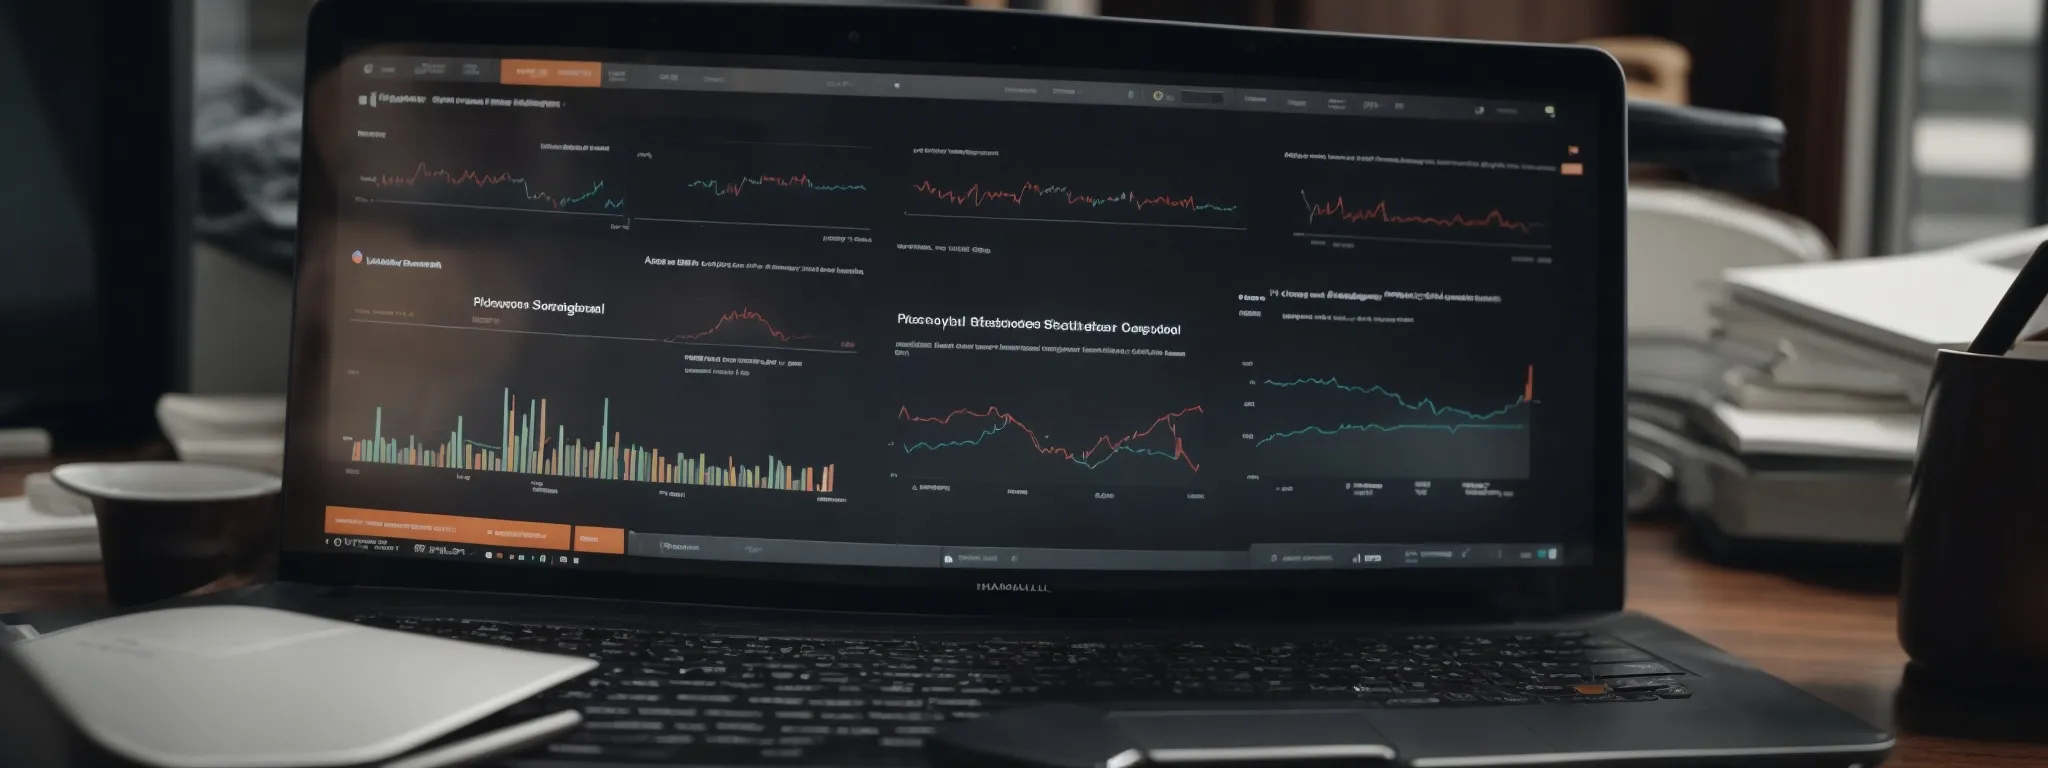 a laptop open on a digital marketing analytics dashboard showing seo performance graphs and customer engagement metrics.